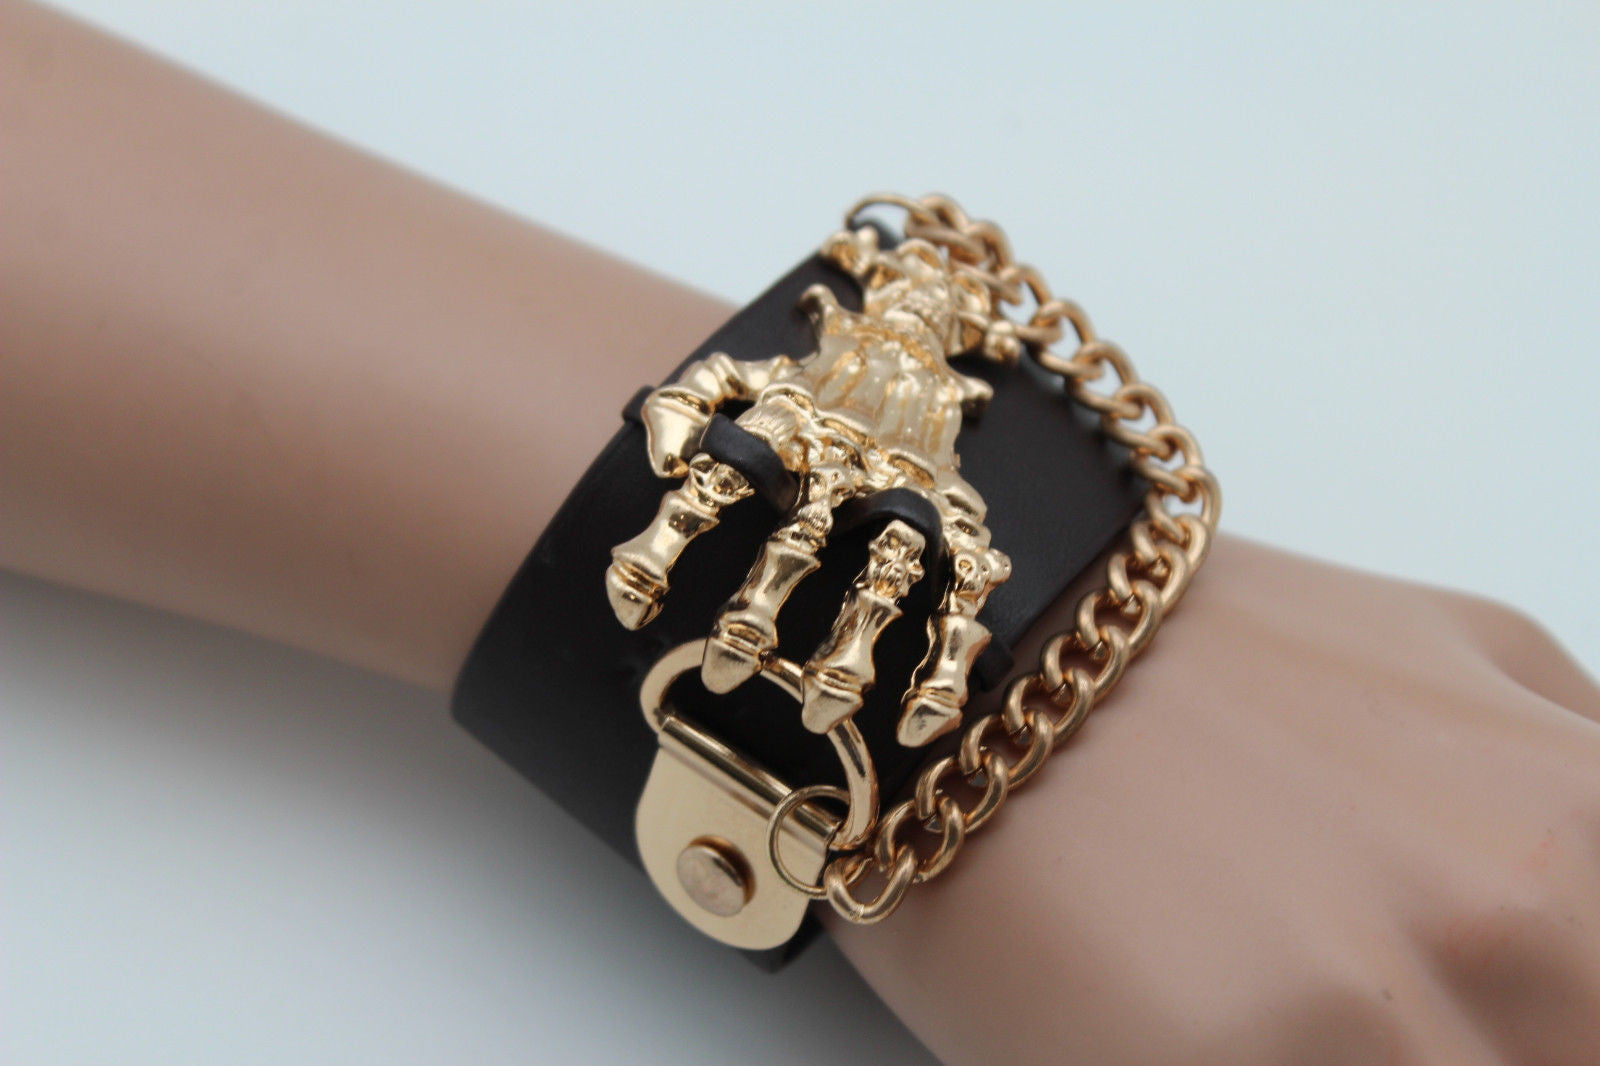 Dark Brown / Black Faux Leather Bracelet Gold / Silver Metal Chains Skeleton Skulls Hand Women Fashion Jewelry Accessories - alwaystyle4you - 1